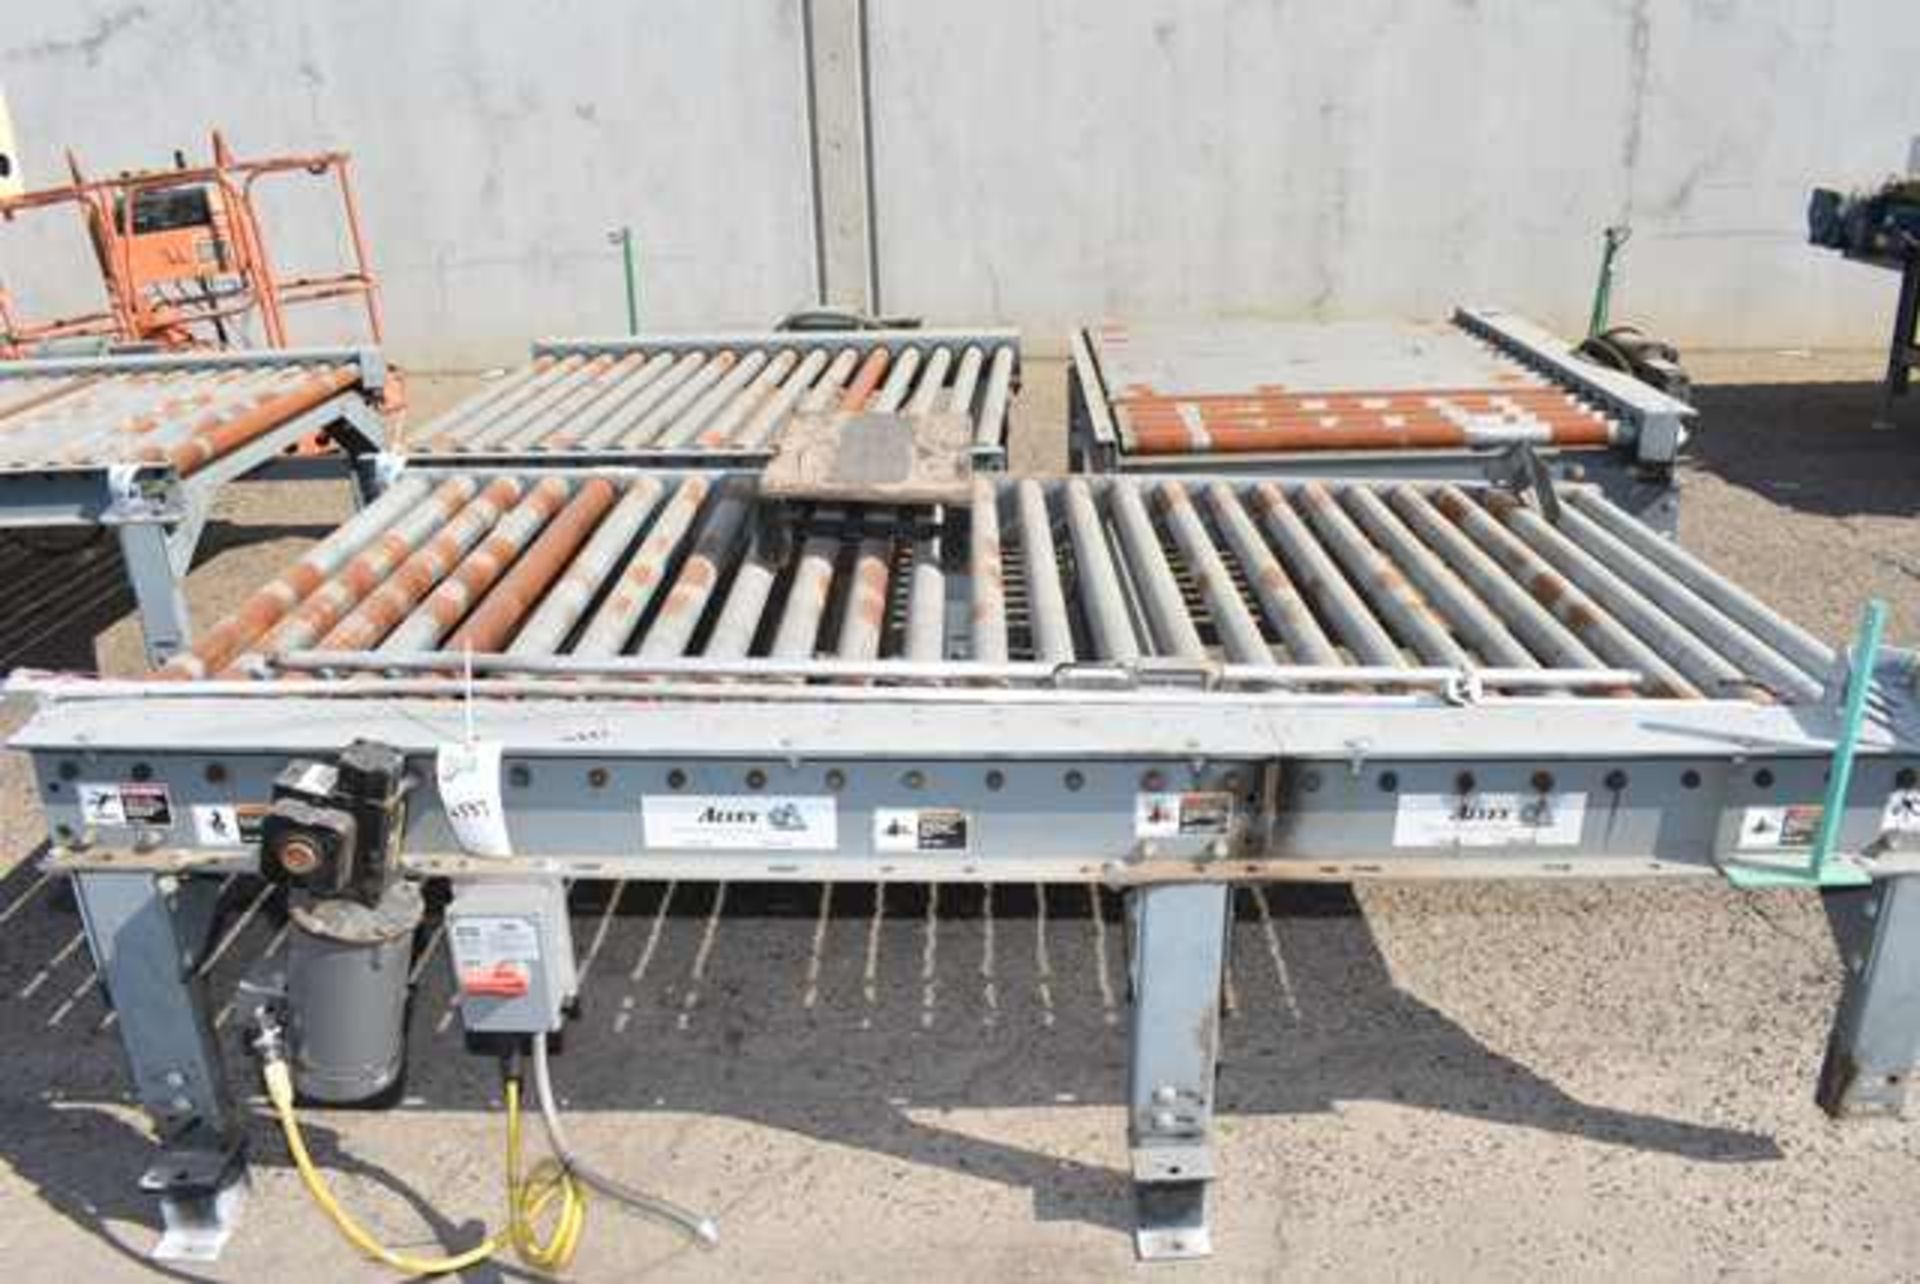 Alvey Motorized Roller Conveyor, 6' Length Typical, 3 Sections, RIGGING FEE: $25